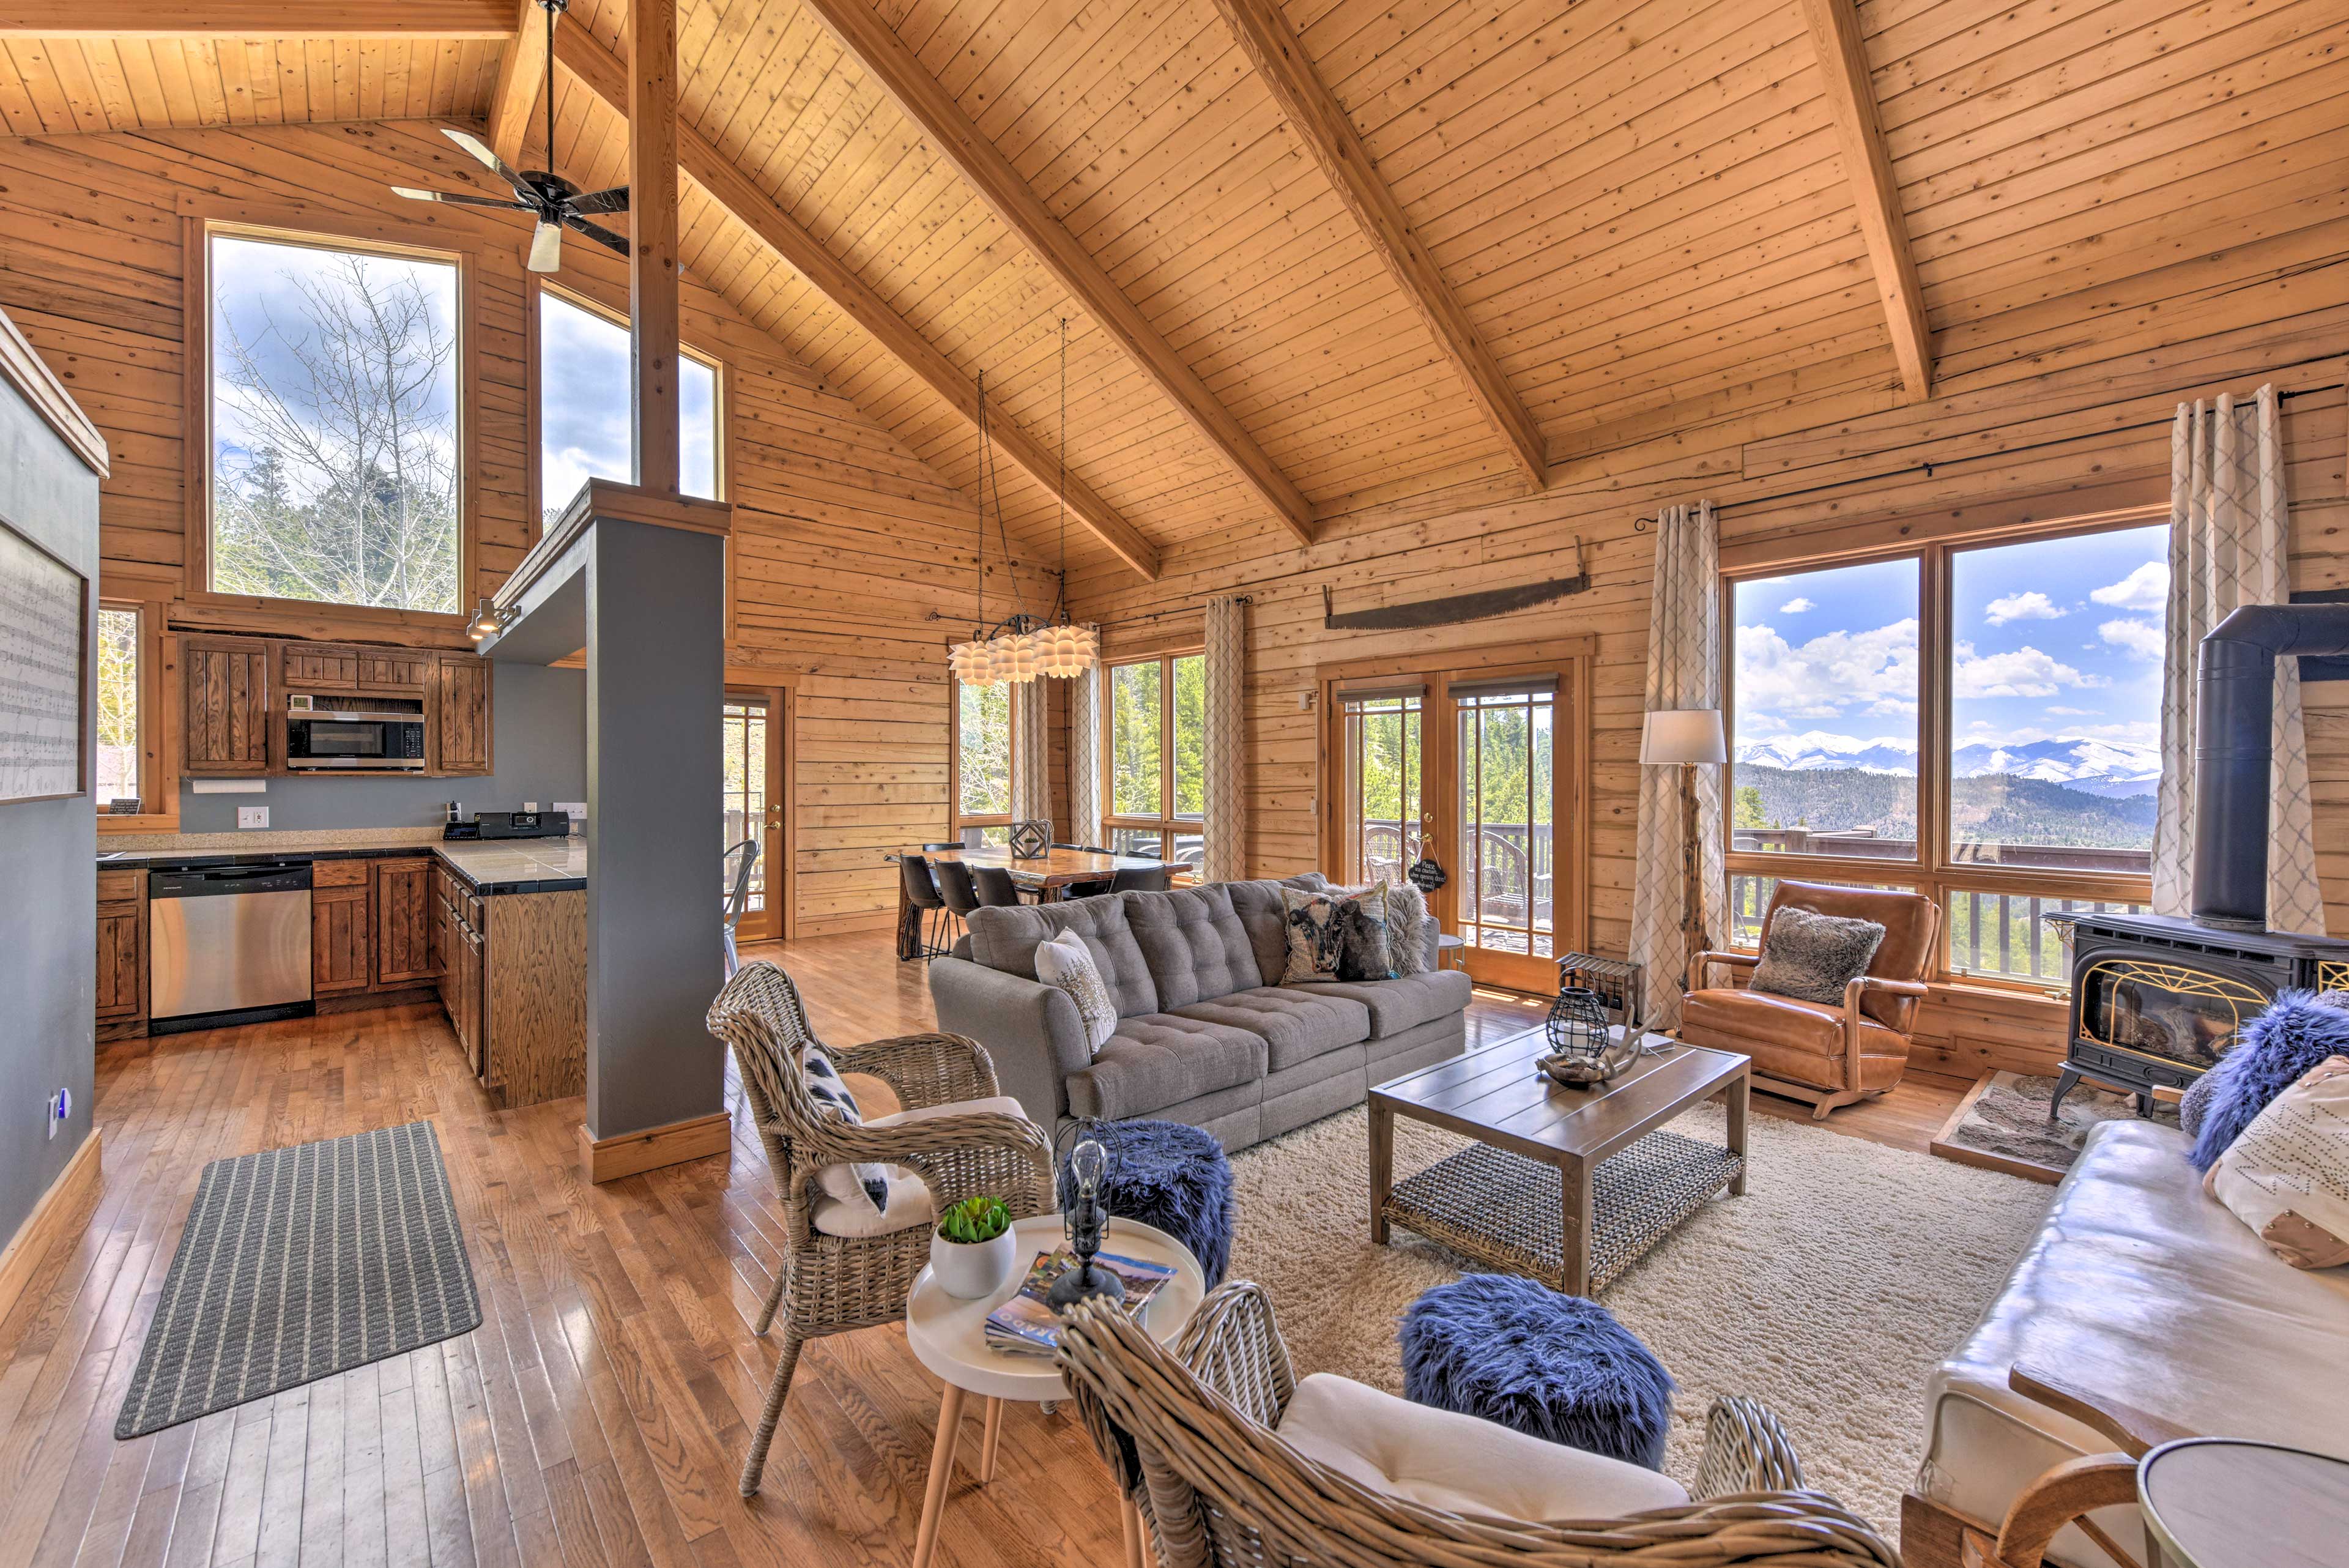 Take a break from reality in this 4-bedroom, 2.5-bath vacation rental cabin.